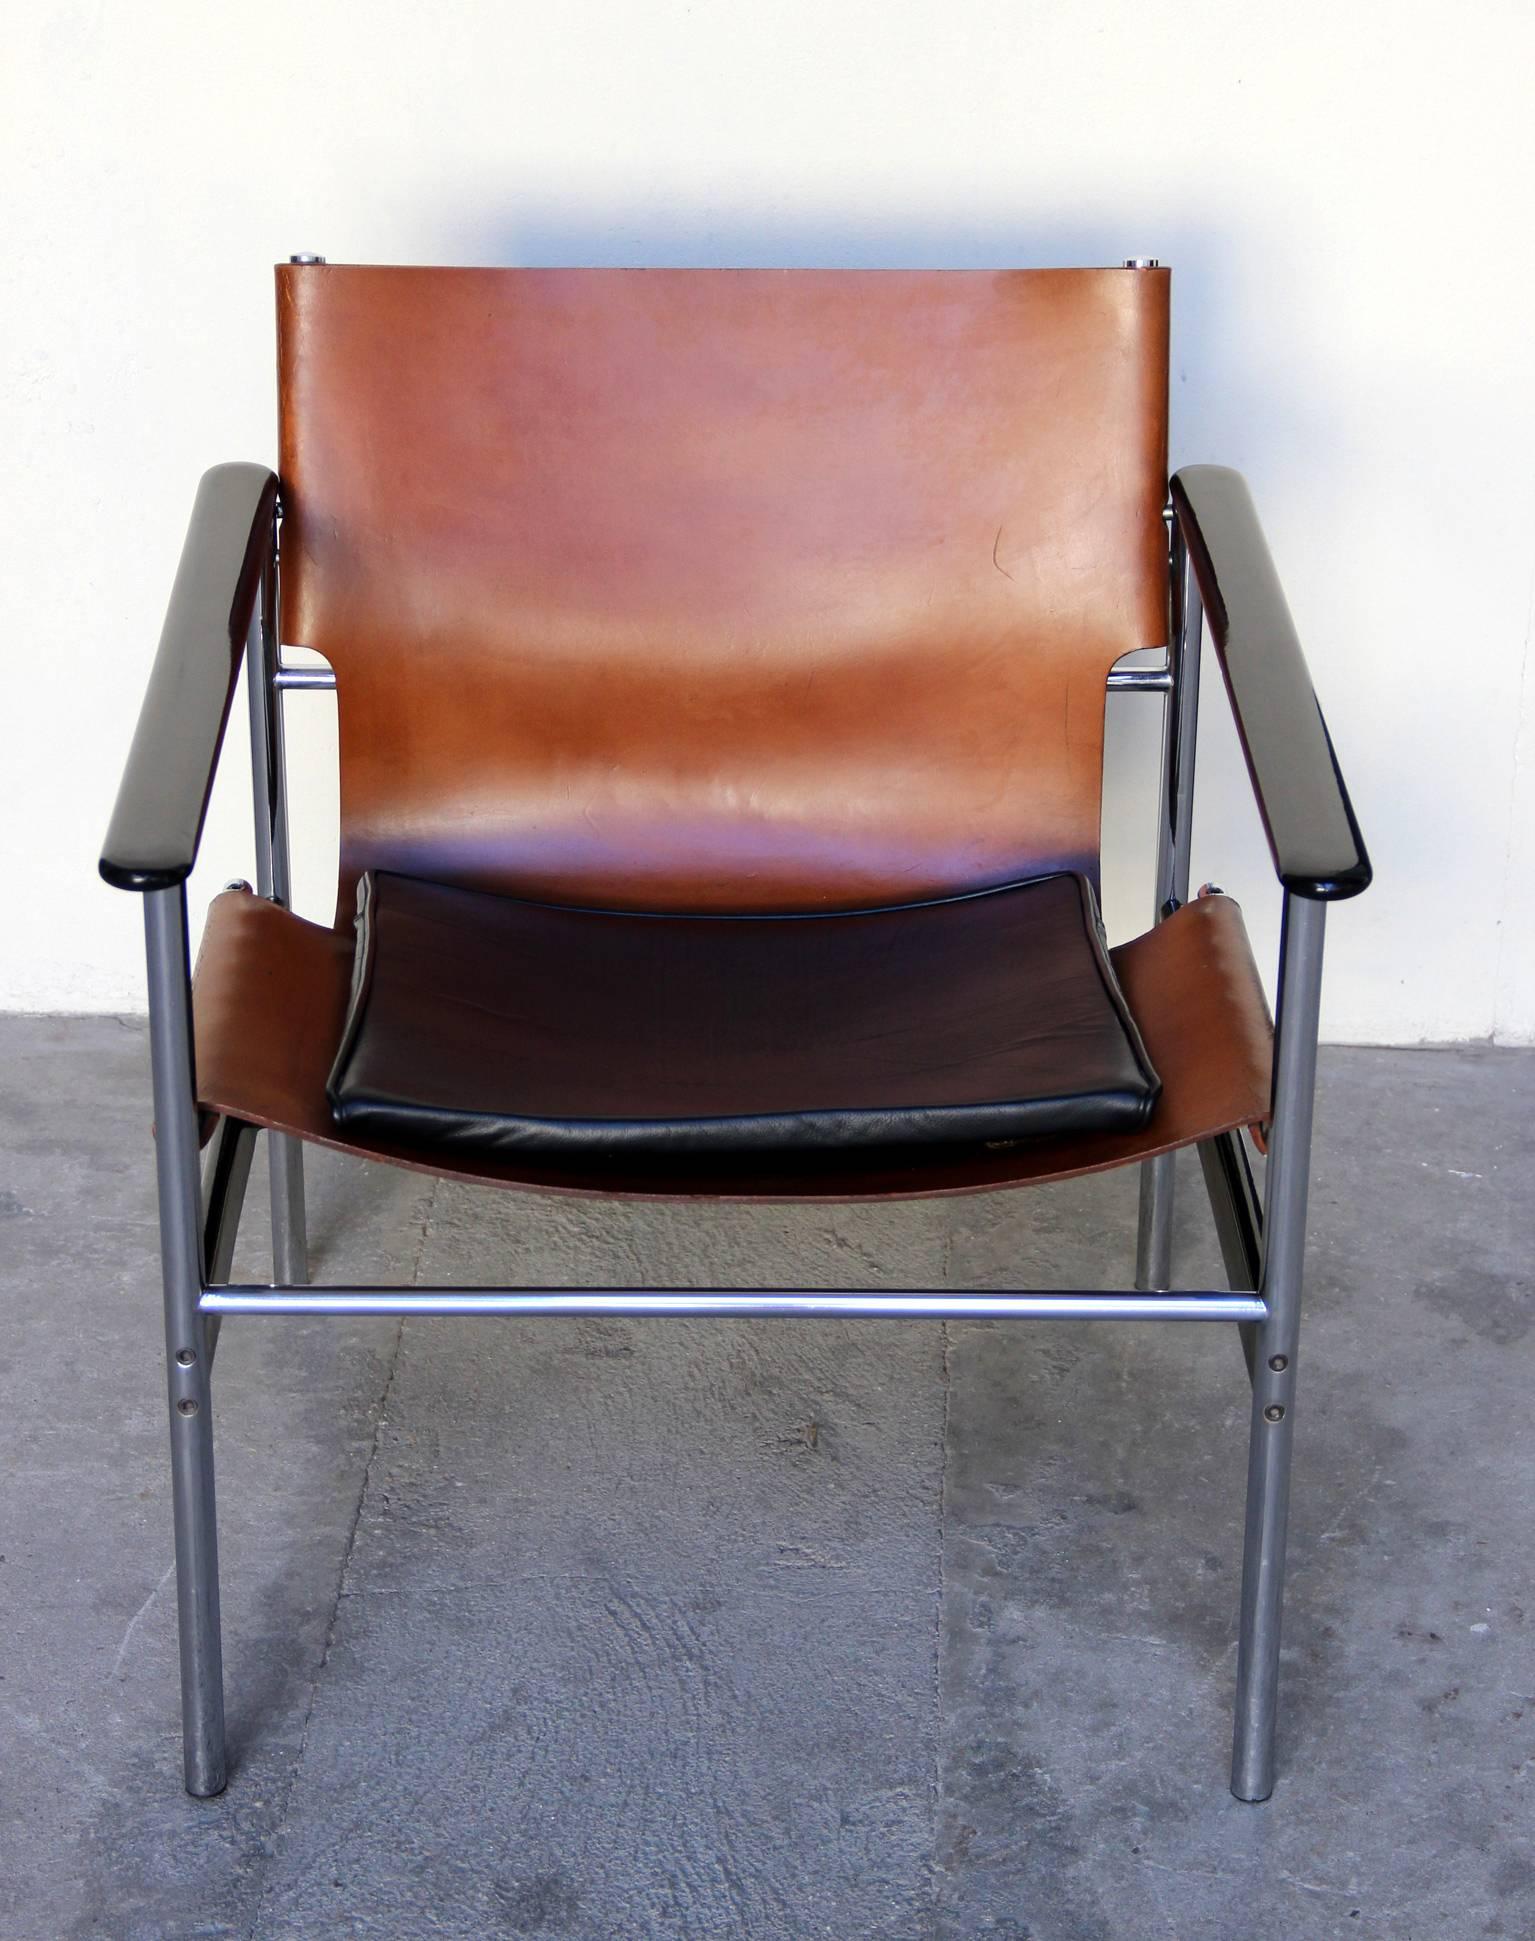 Pair of 657 sling lounge chairs with original tan leather sling seats with attached black leather seat cushion. In a tubular frame with black resin coated aluminium armrests. Made in 1964.

Two pairs are available.